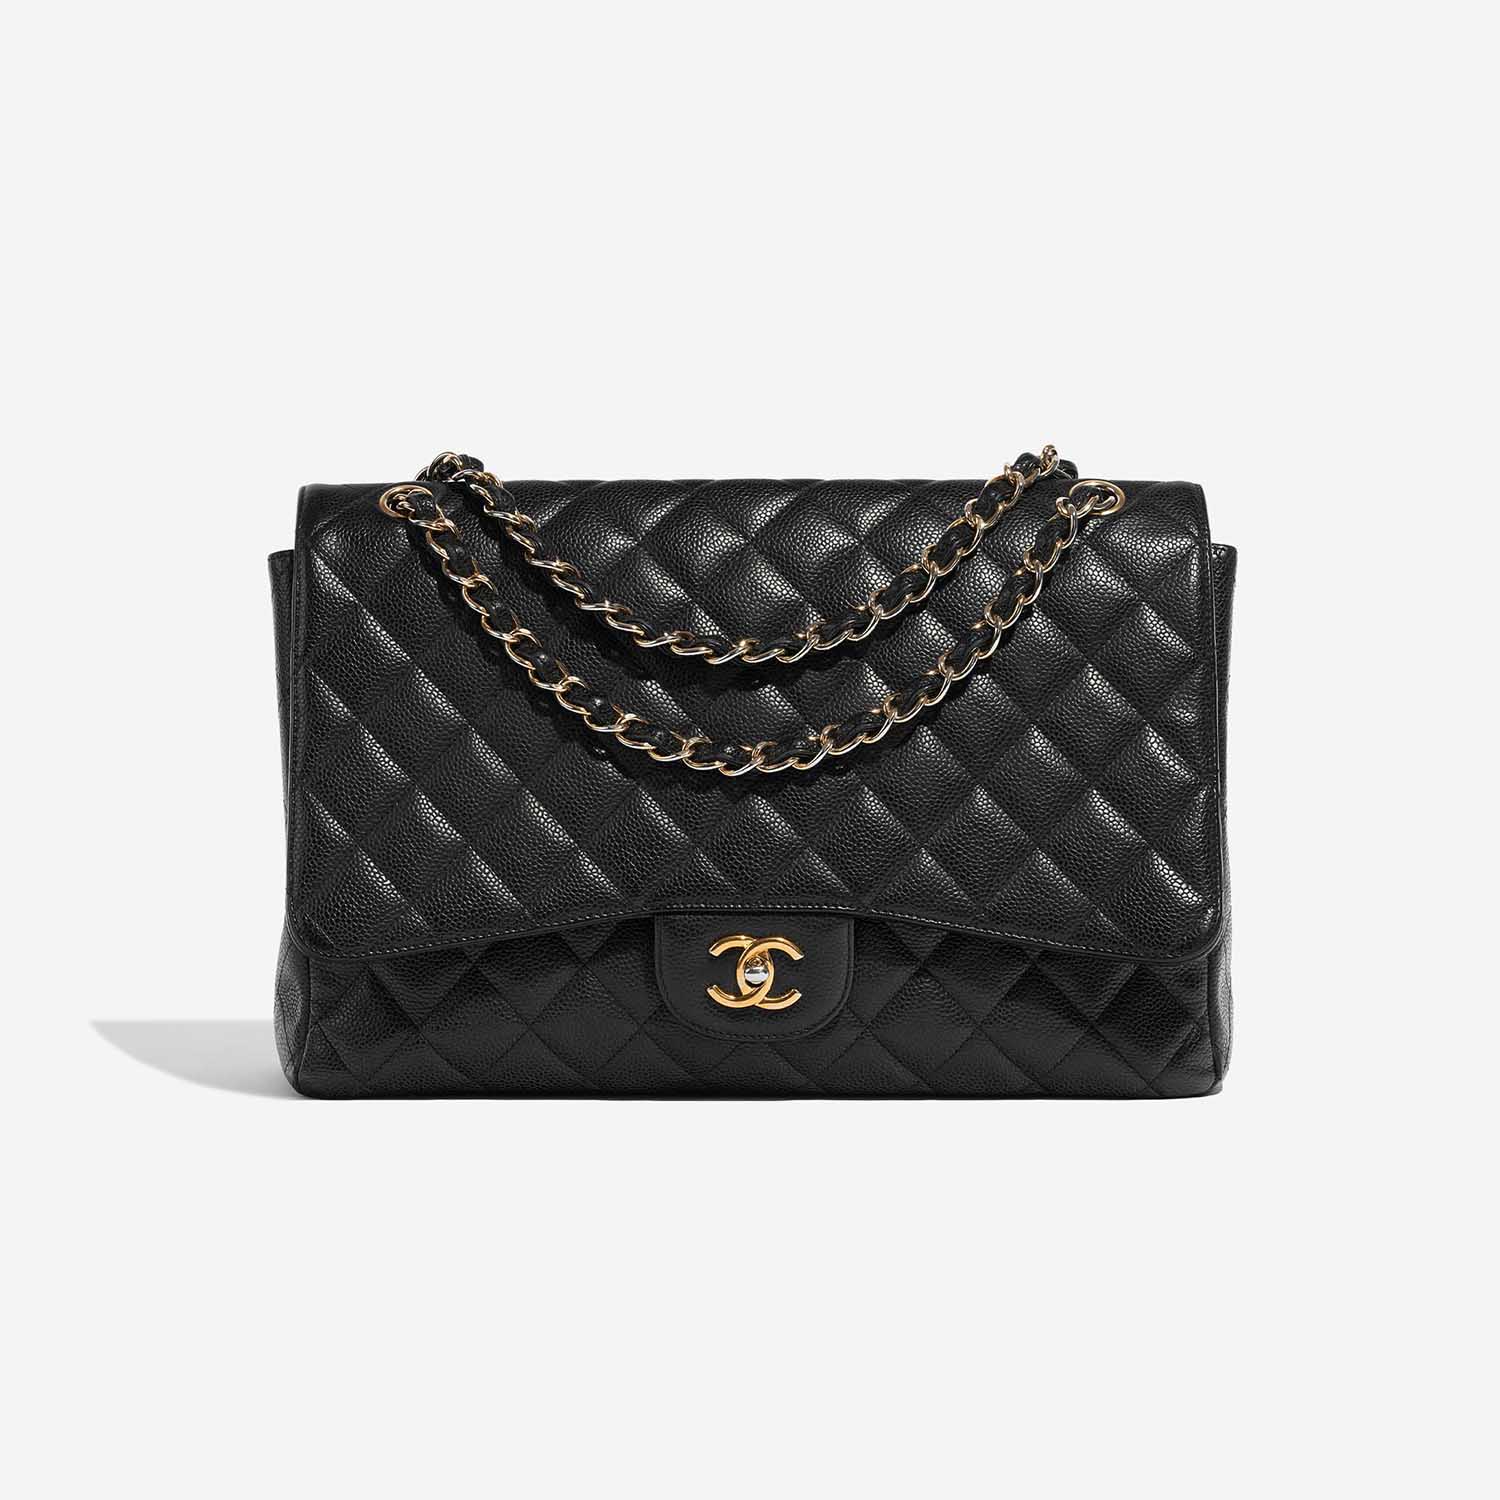 Pre-owned Chanel bag Timeless Maxi Caviar Black Black Front | Sell your designer bag on Saclab.com